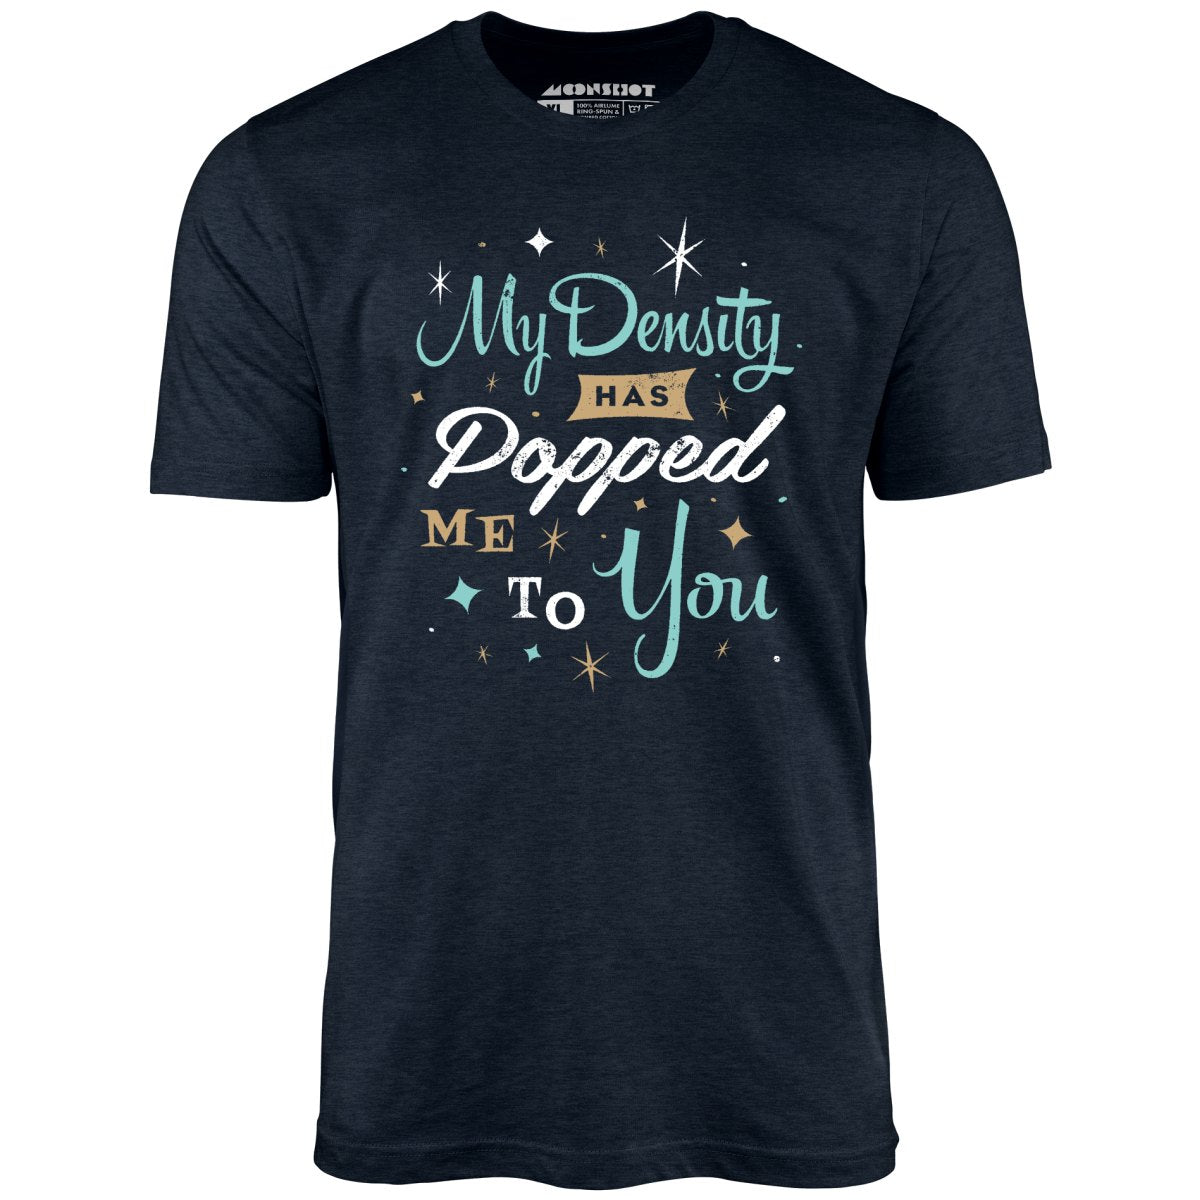 My Density Has Popped Me To You - Unisex T-Shirt